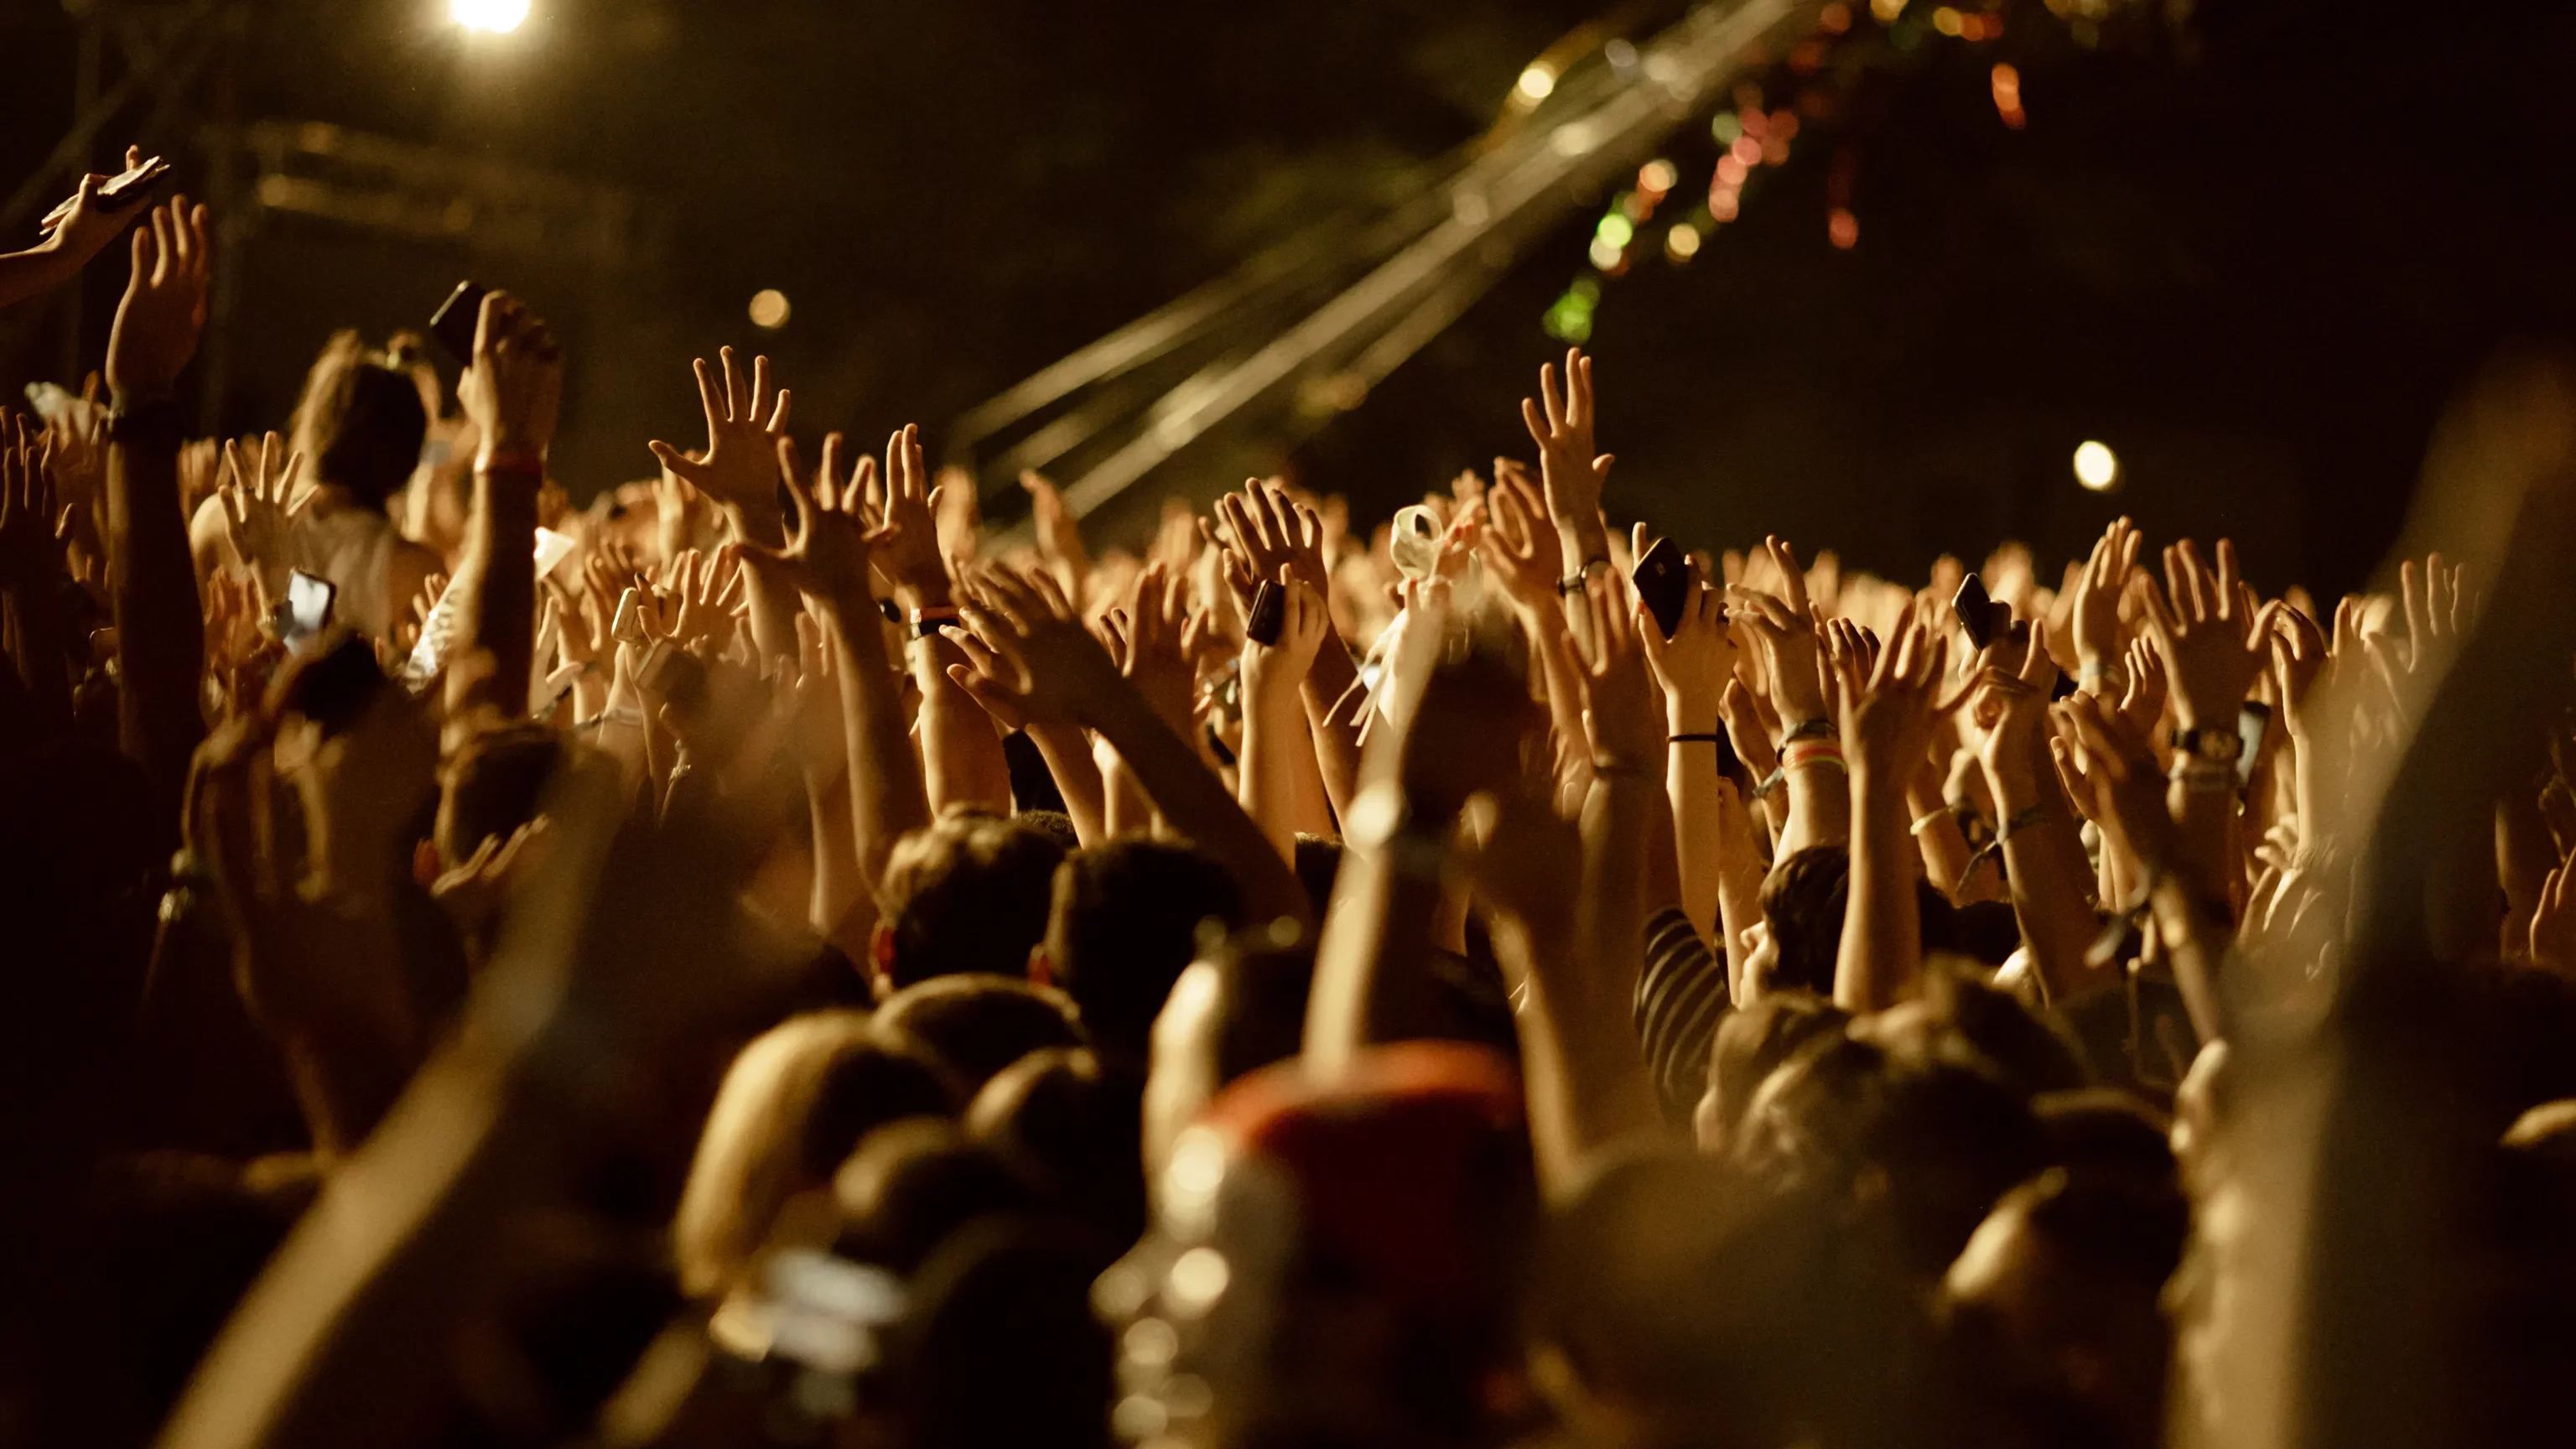 EGG events - Agency - About us : Header - Large group of fans with arms raised having fun on a music concert at night.